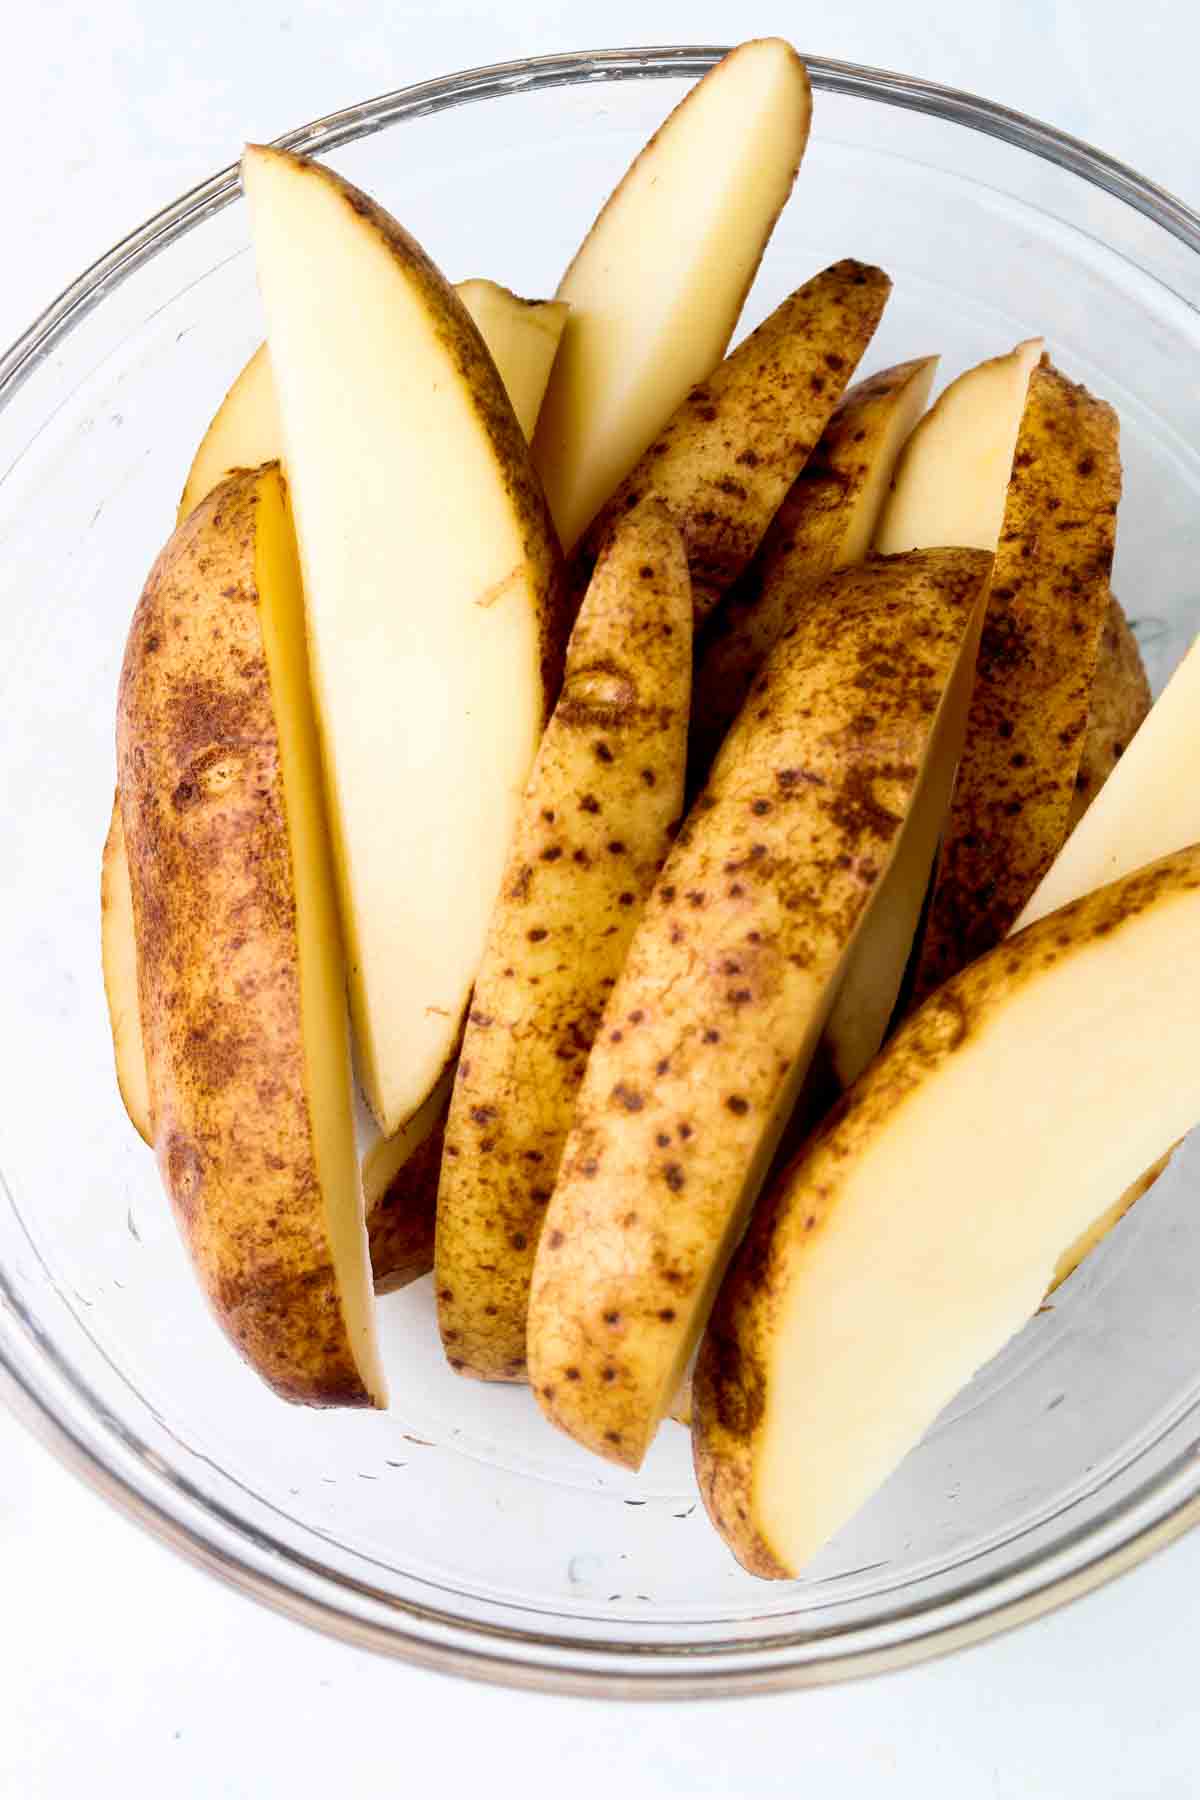 Cut up potato wedges in a glass bowl.